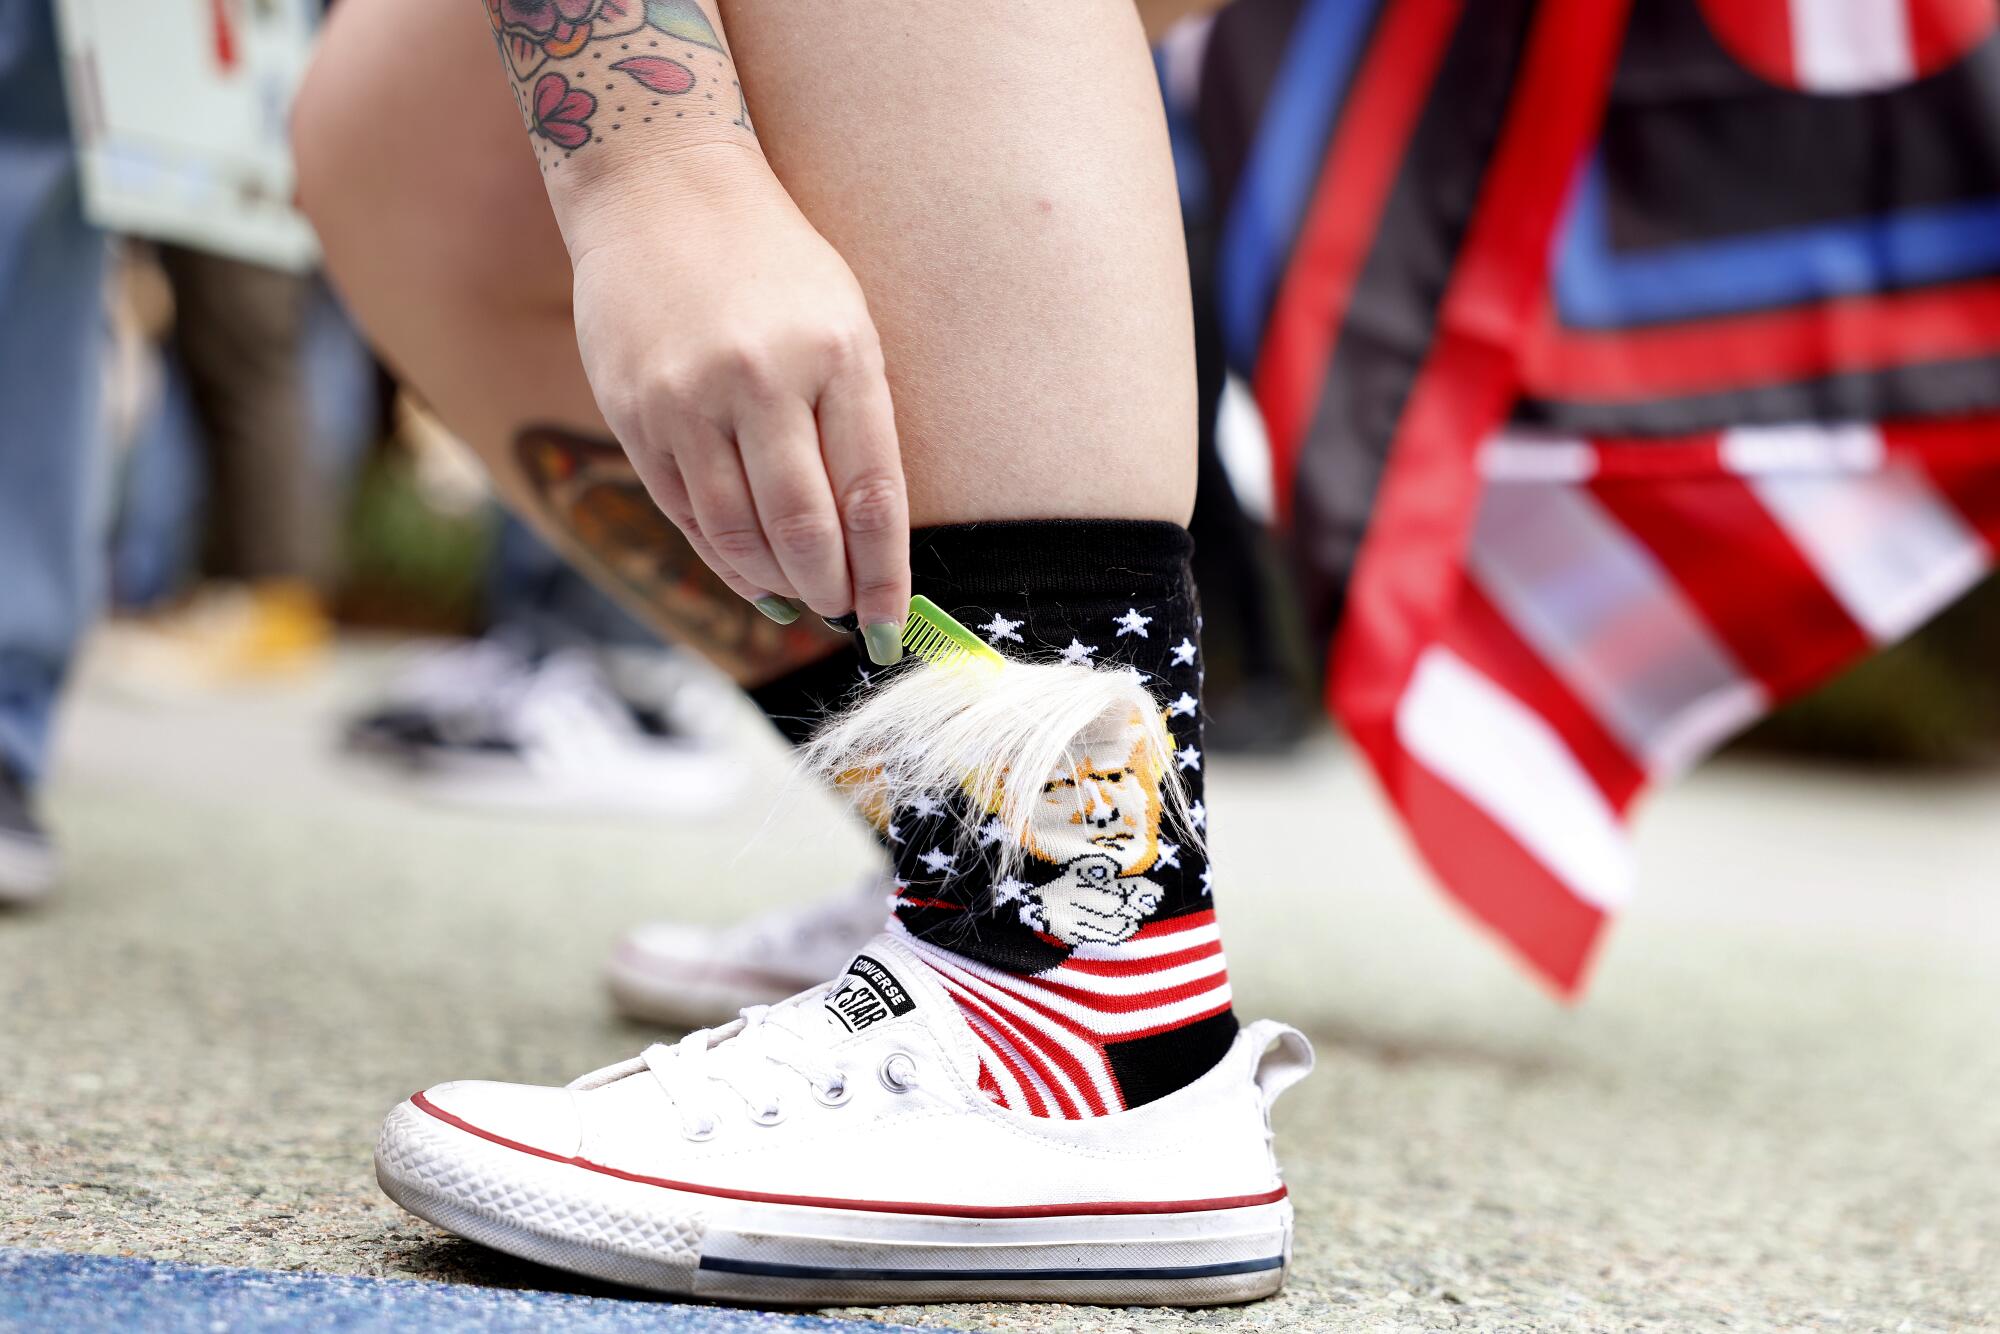 Becca Esler of Eastvale brushes the hair on her Trump socks outside of the California Republican Party Convention.